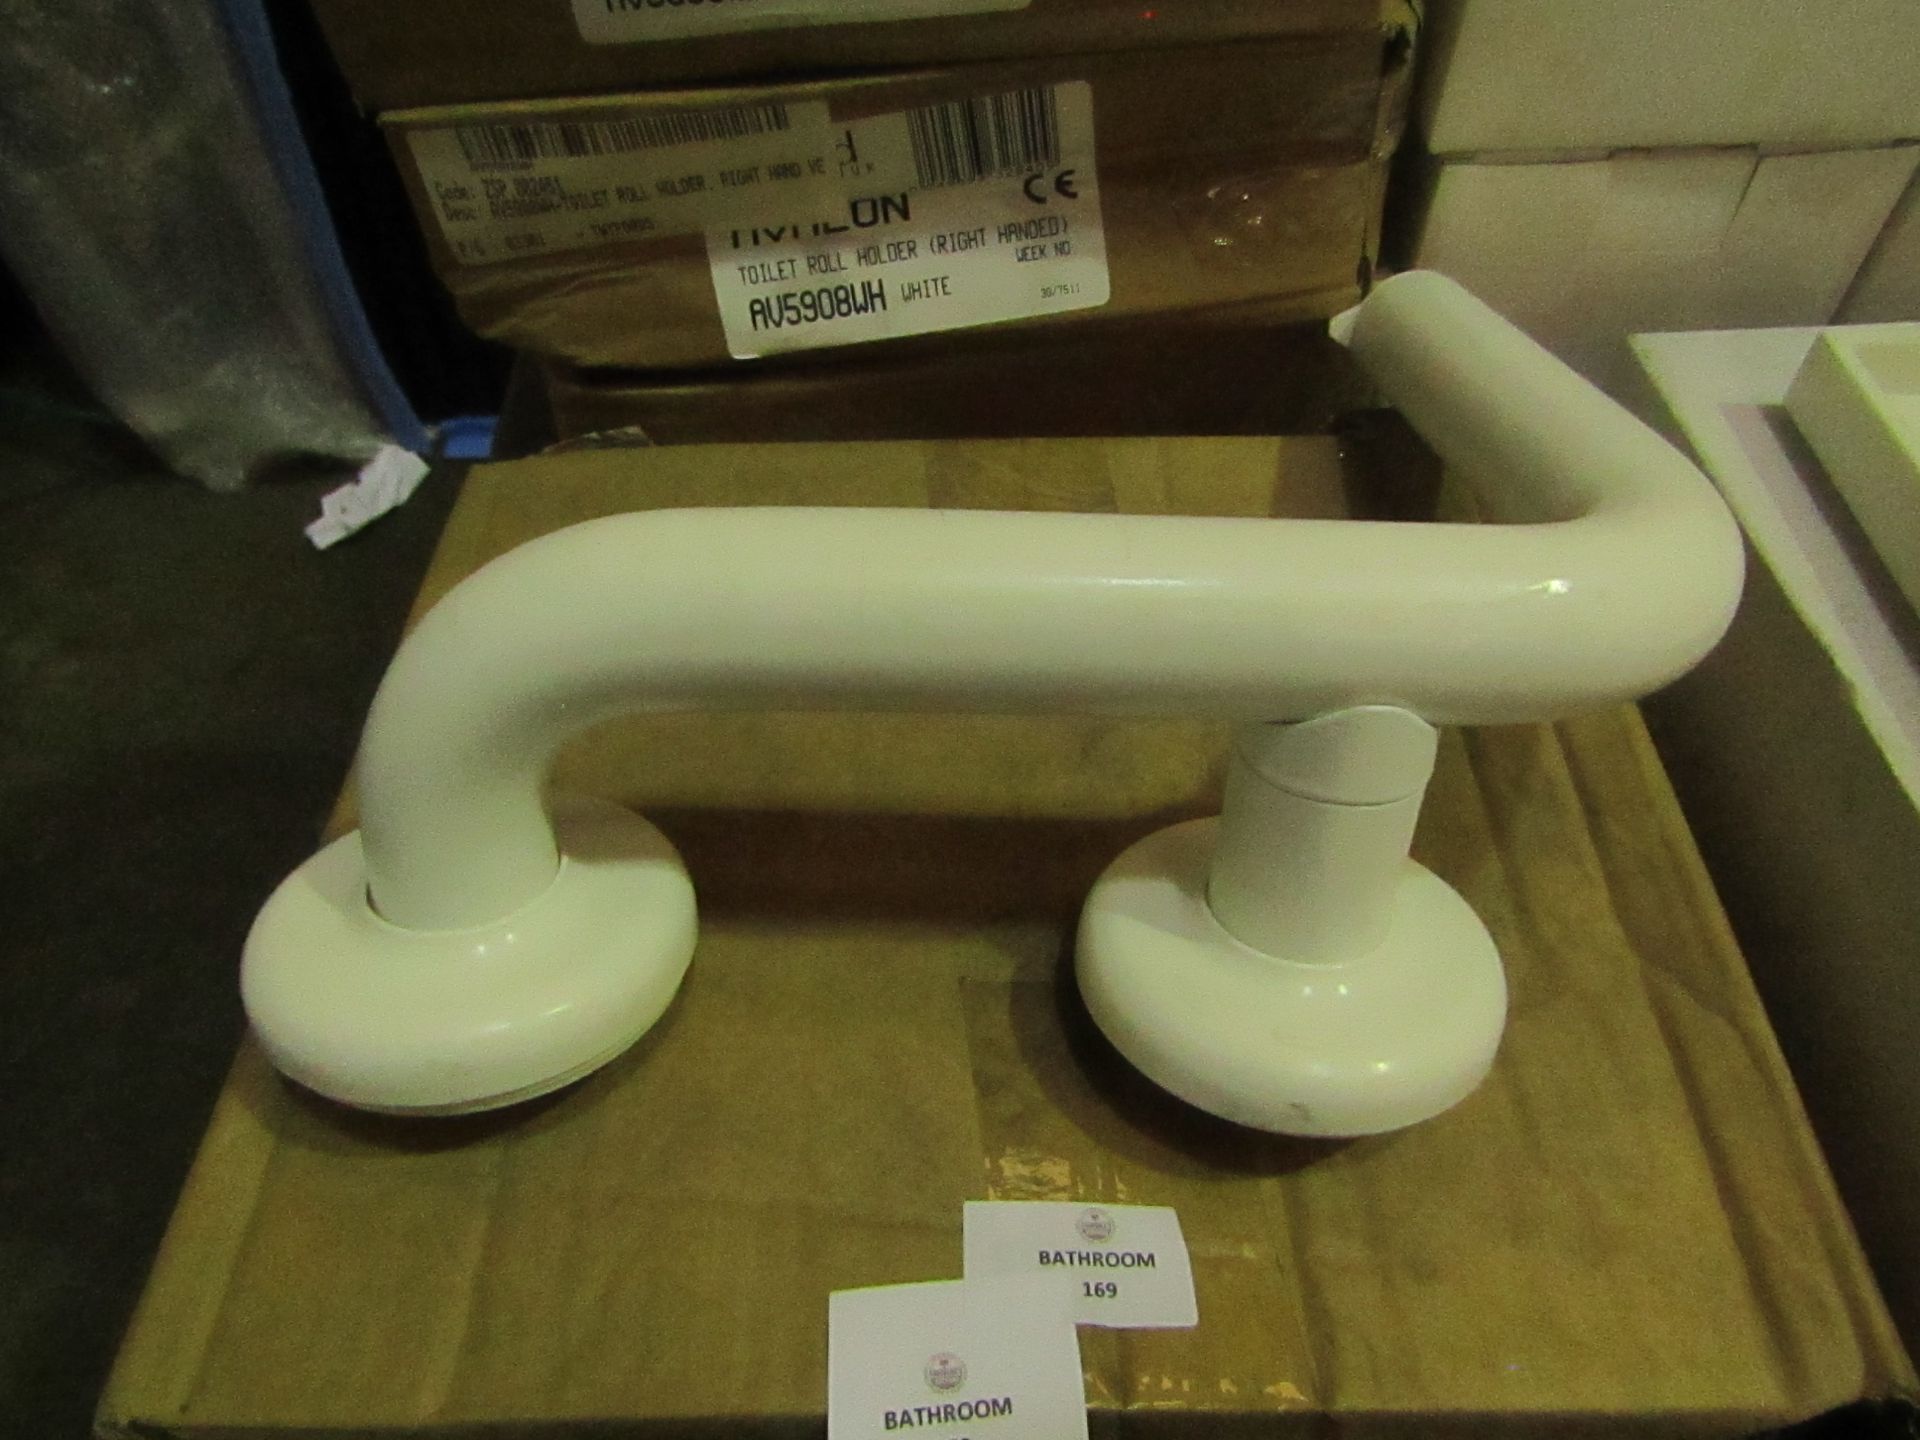 Twyfords - Right-Handed Toilet Roll Holder - White - Good Condition & Boxed.